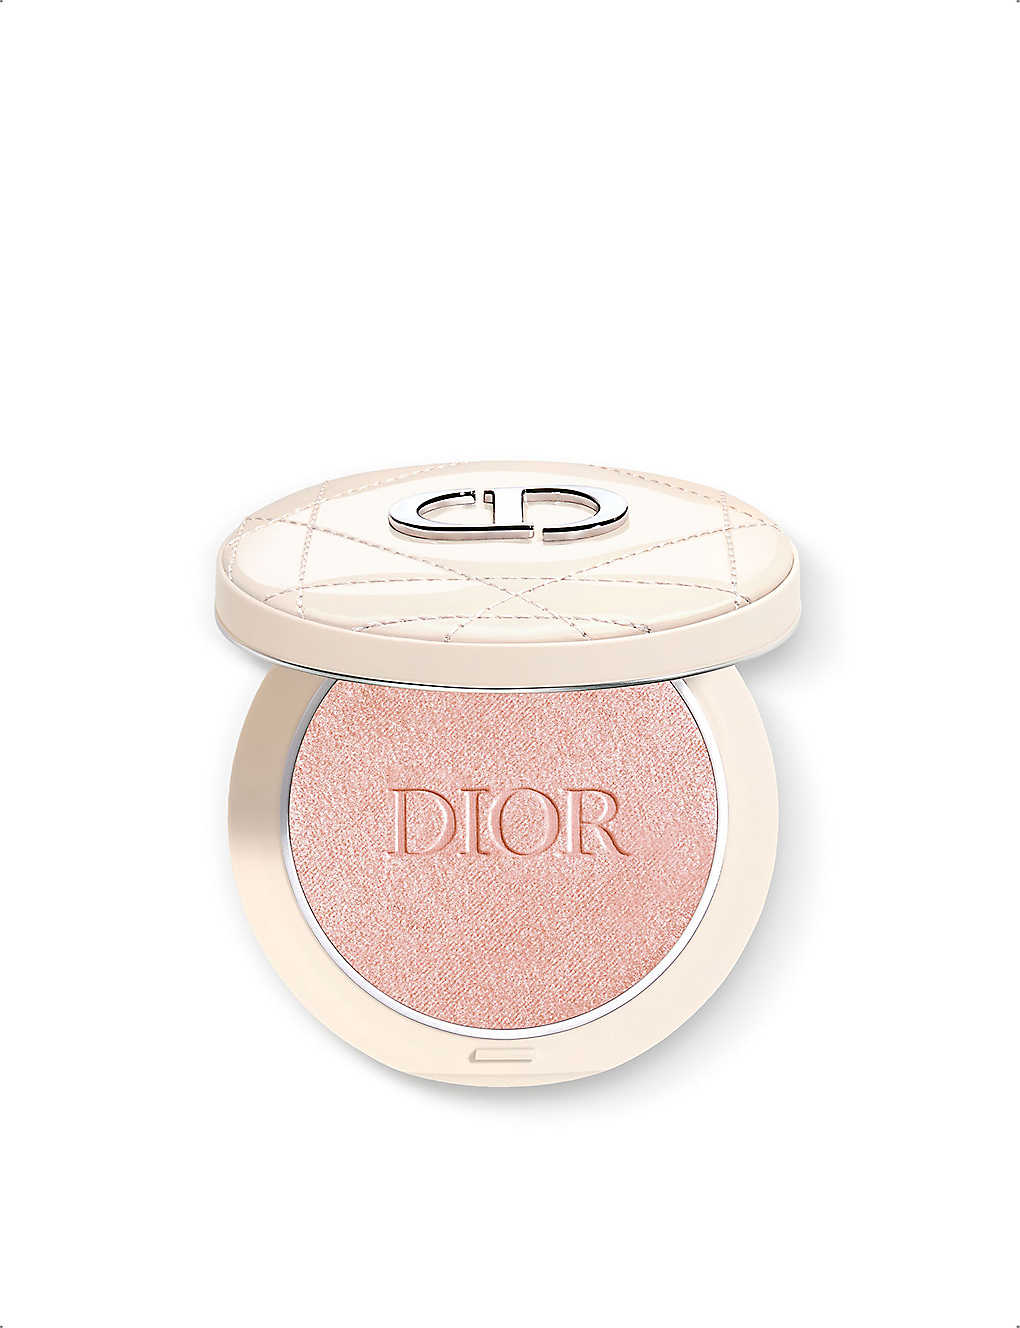 Dior 02 Pink Glow Forever Couture Luminizer Intense Highlighting Powder 6g